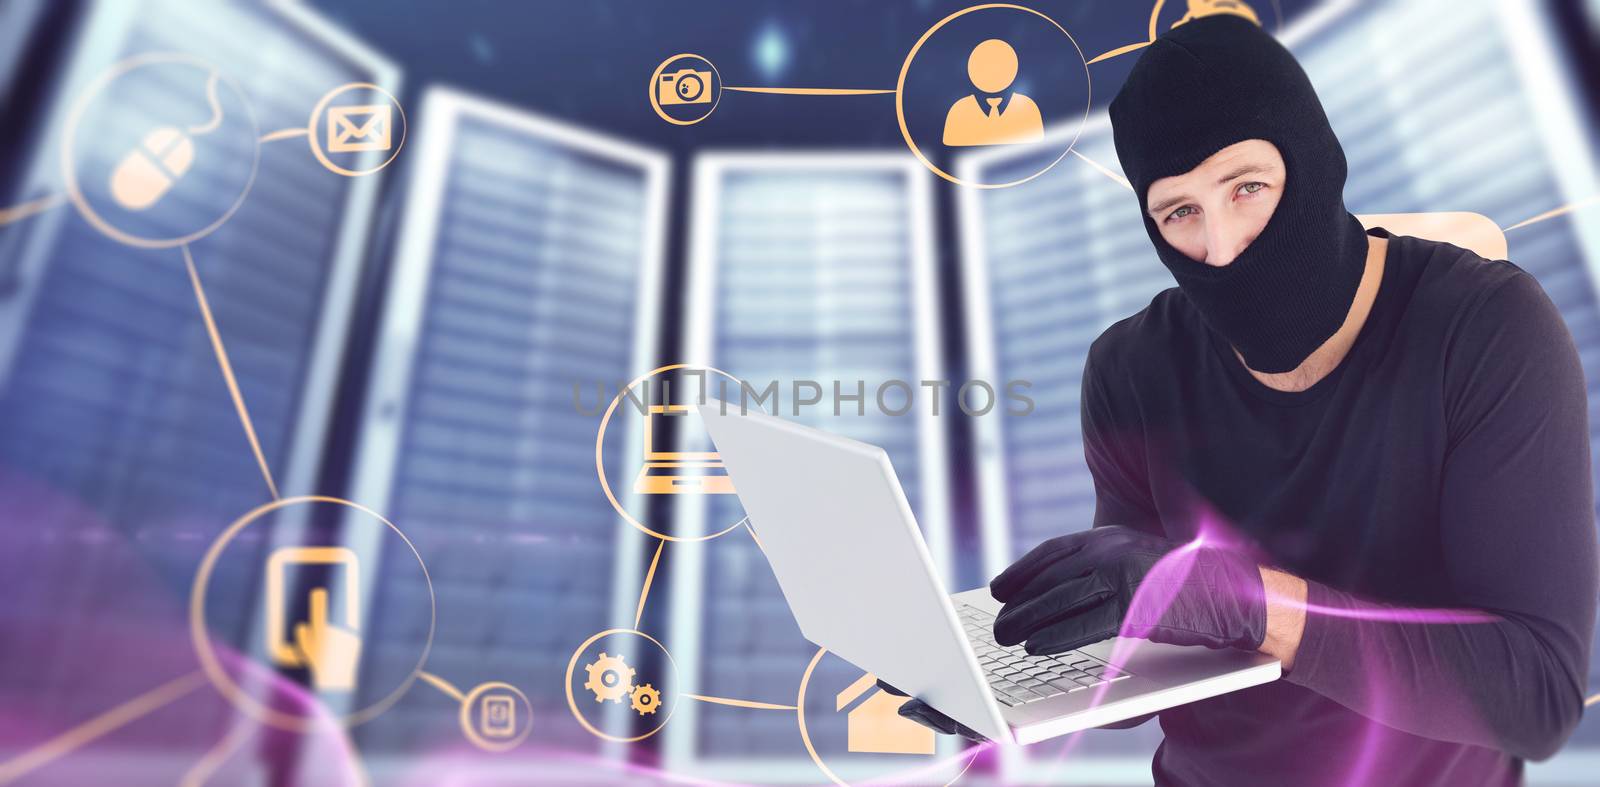 Burglar standing holding laptop while looking at camera against abstract glowing black background